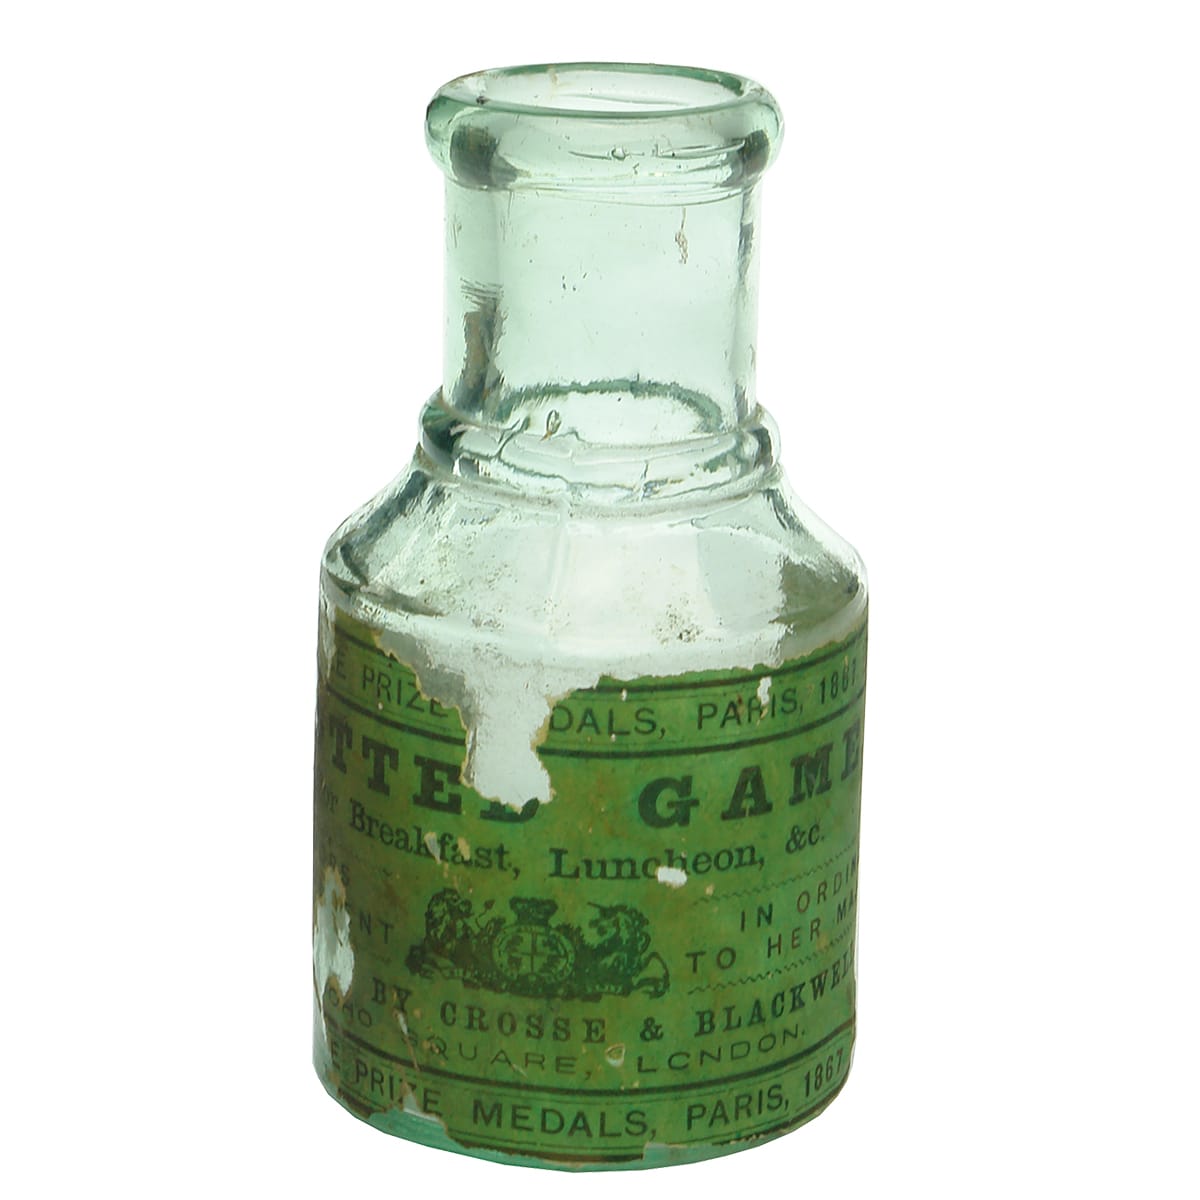 Potted Game Jar! Crosse & Blackwell labelled. 115 mm